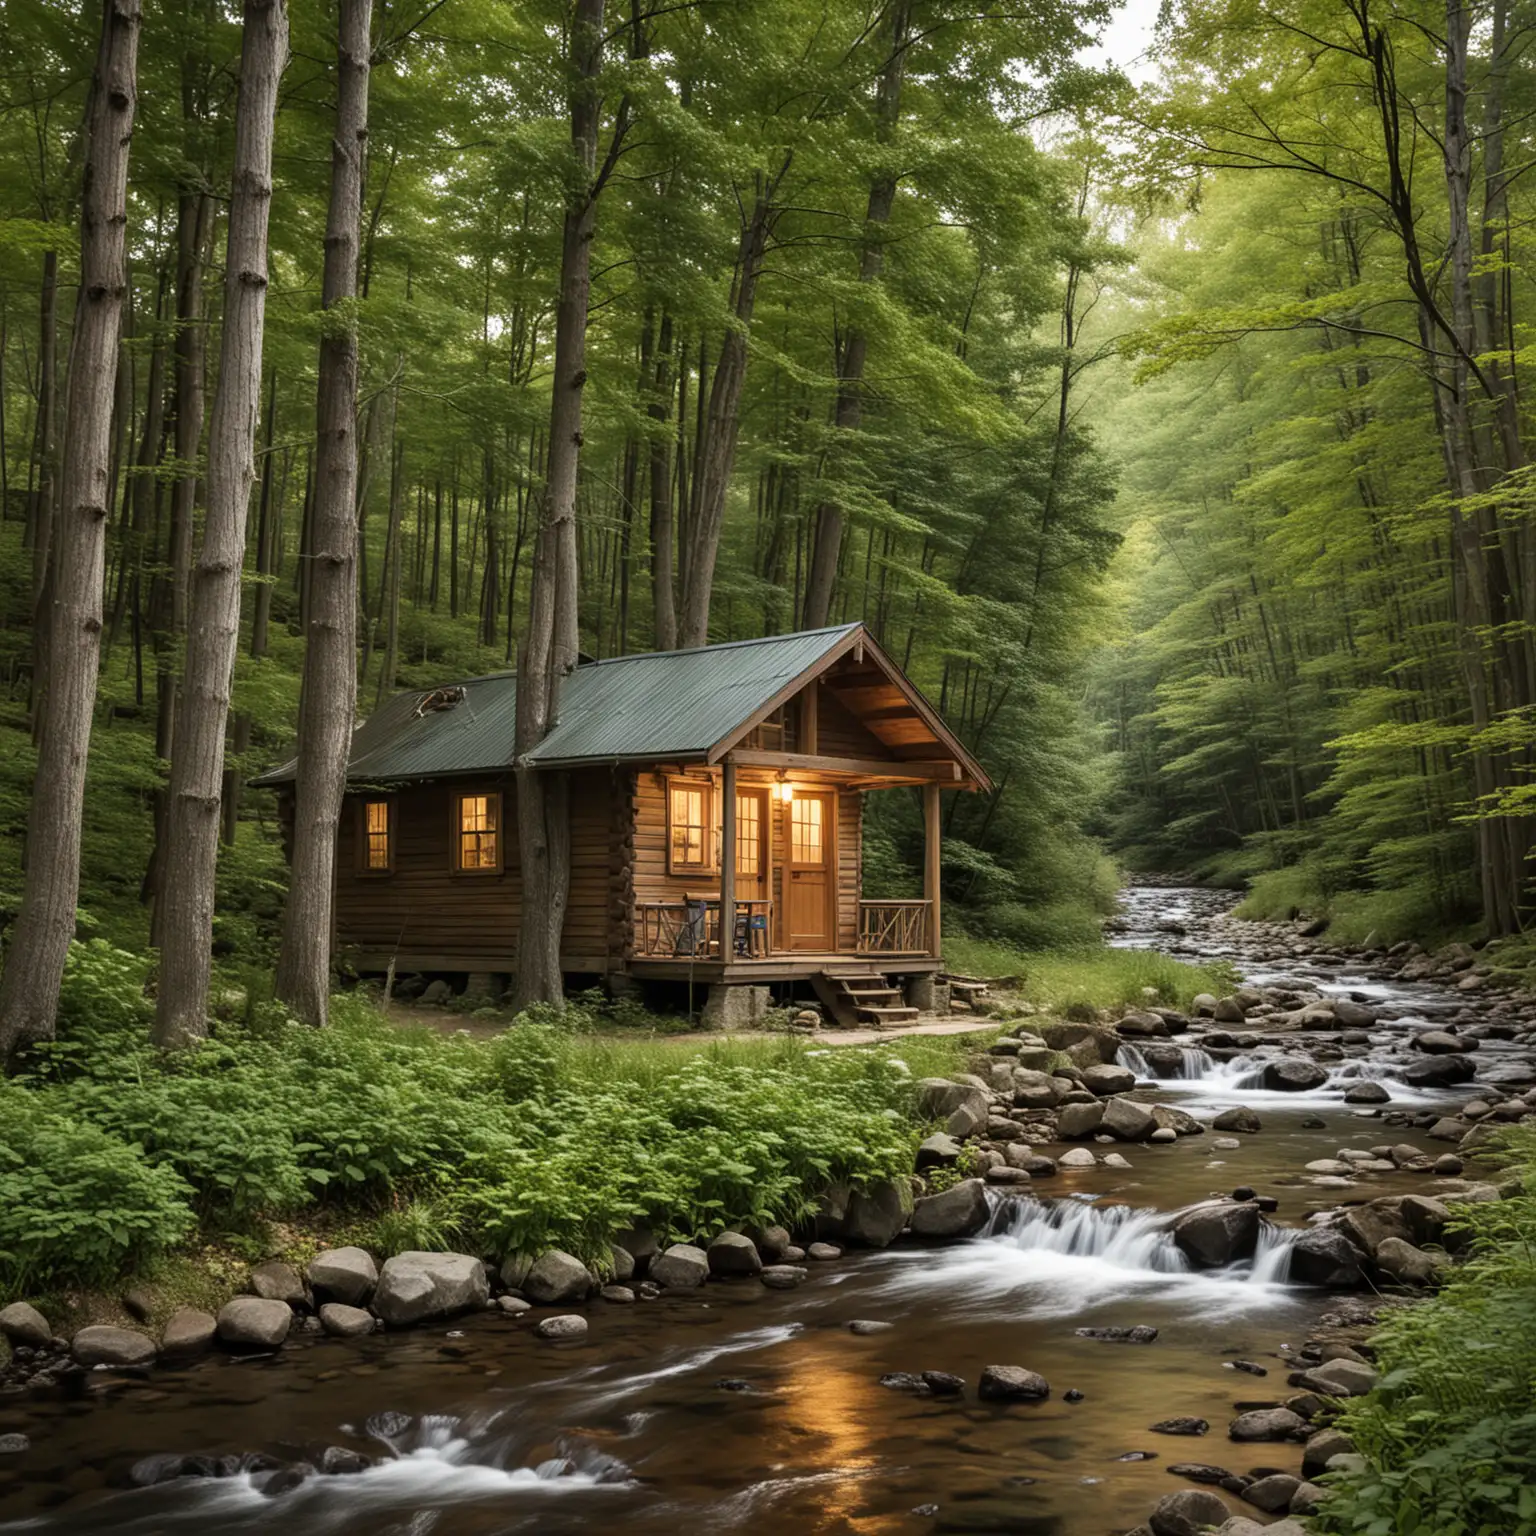 Tranquil Cabin by the Stream in Wooded Surroundings